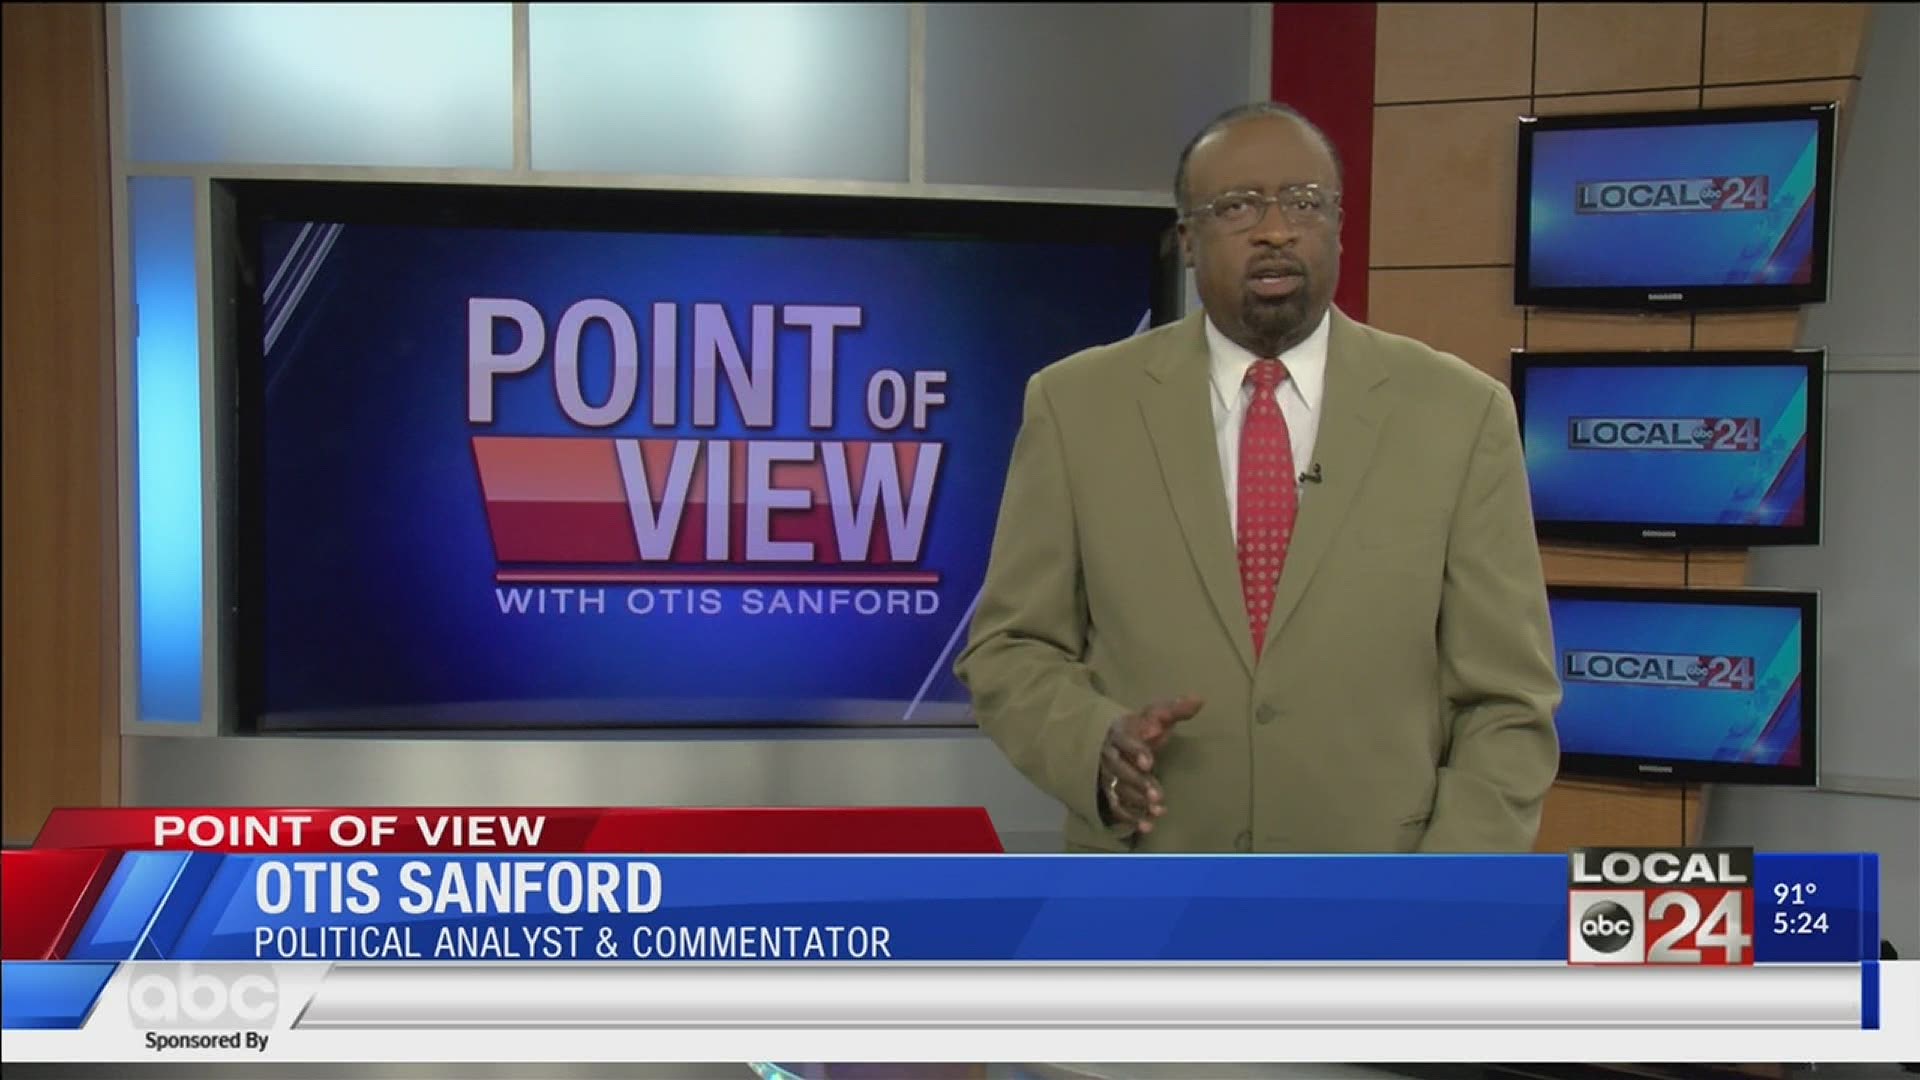 Local 24 News political analyst and commentator Otis Sanford shares his point of view on the name change and push behind it.